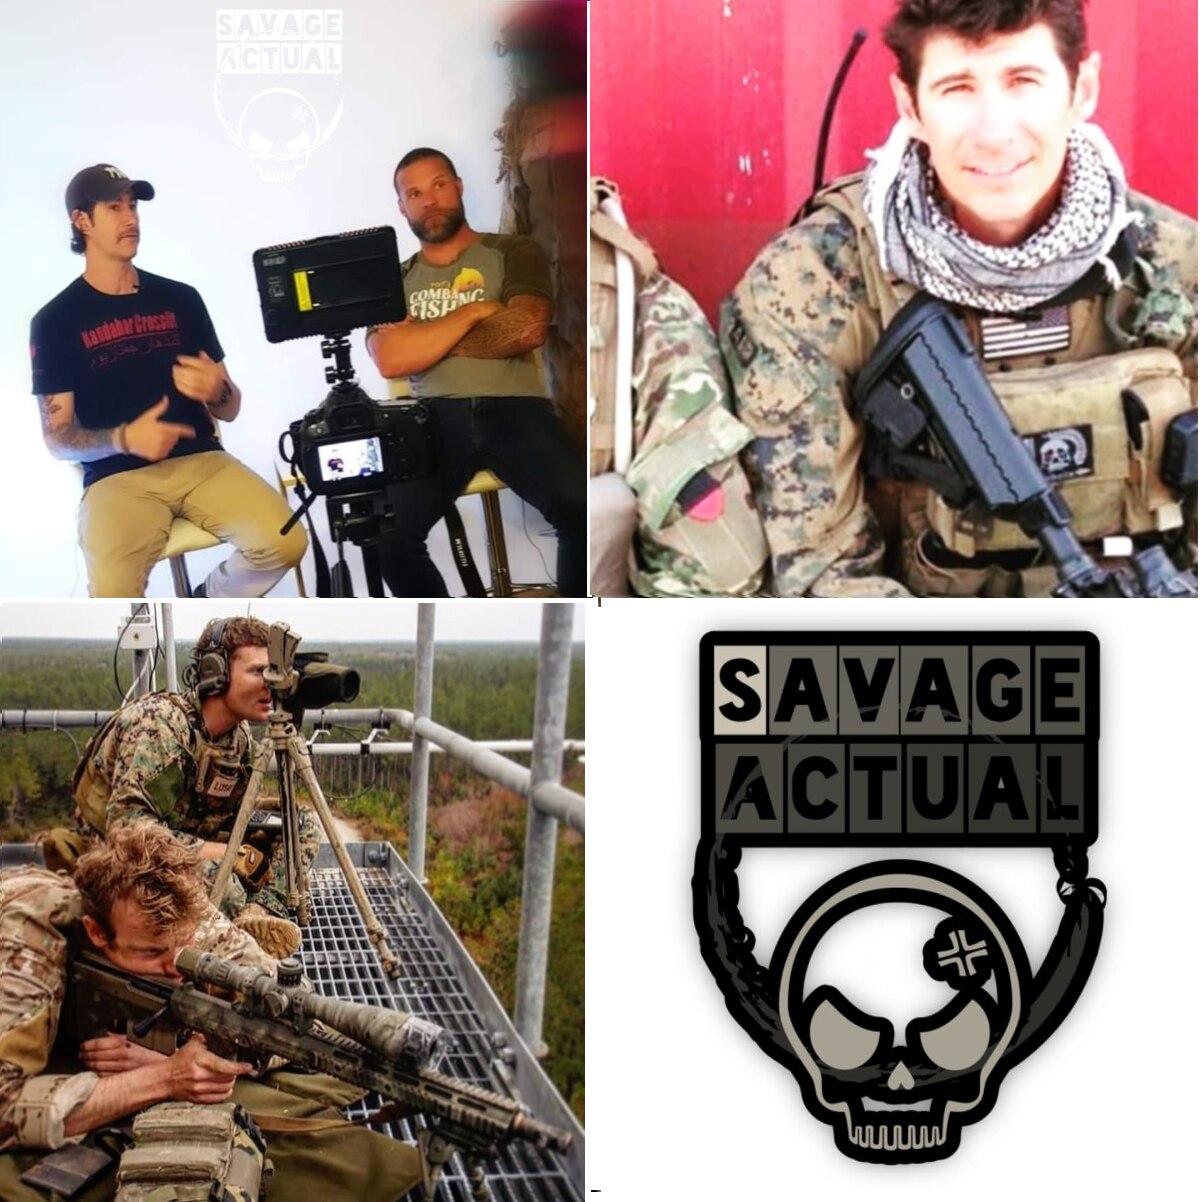 Special Operation veterans Patrick Moltrup and Jason Lilley have teamed up to create a YouTube channel, which has quickly grown to more than 80,000 subscribers. (Savage Actual YouTube page) Marine veterans’ YouTube channel gives civilians a taste of special ops